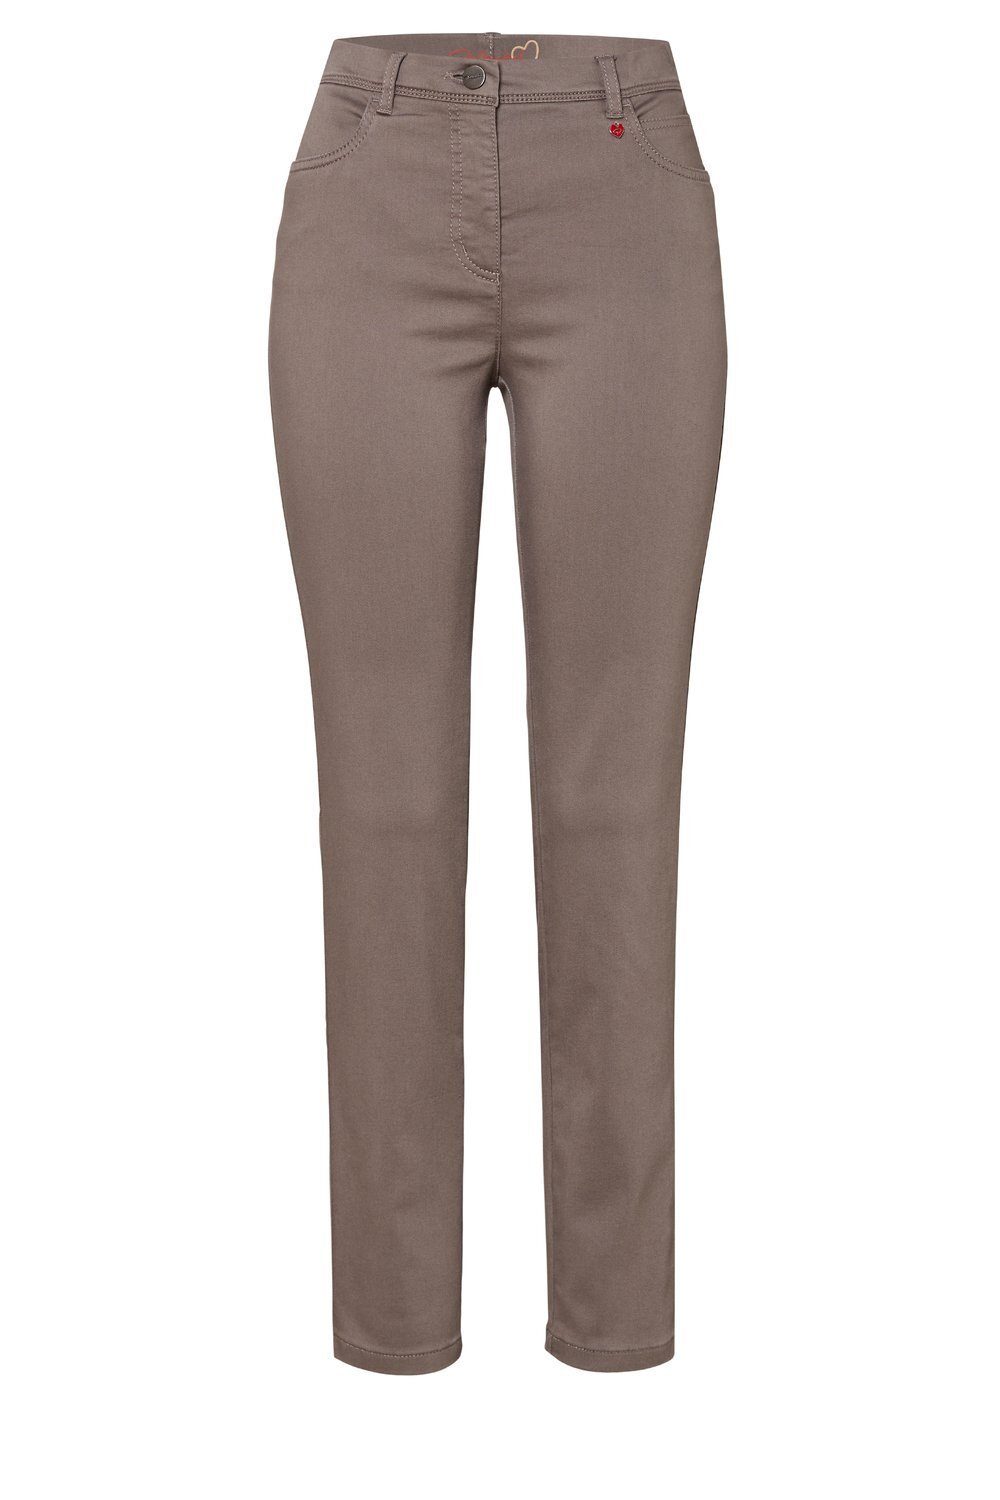 Relaxed by TONI 5-Pocket-Hose Meine Passform taupe schmaler beste 075 - Freundin in